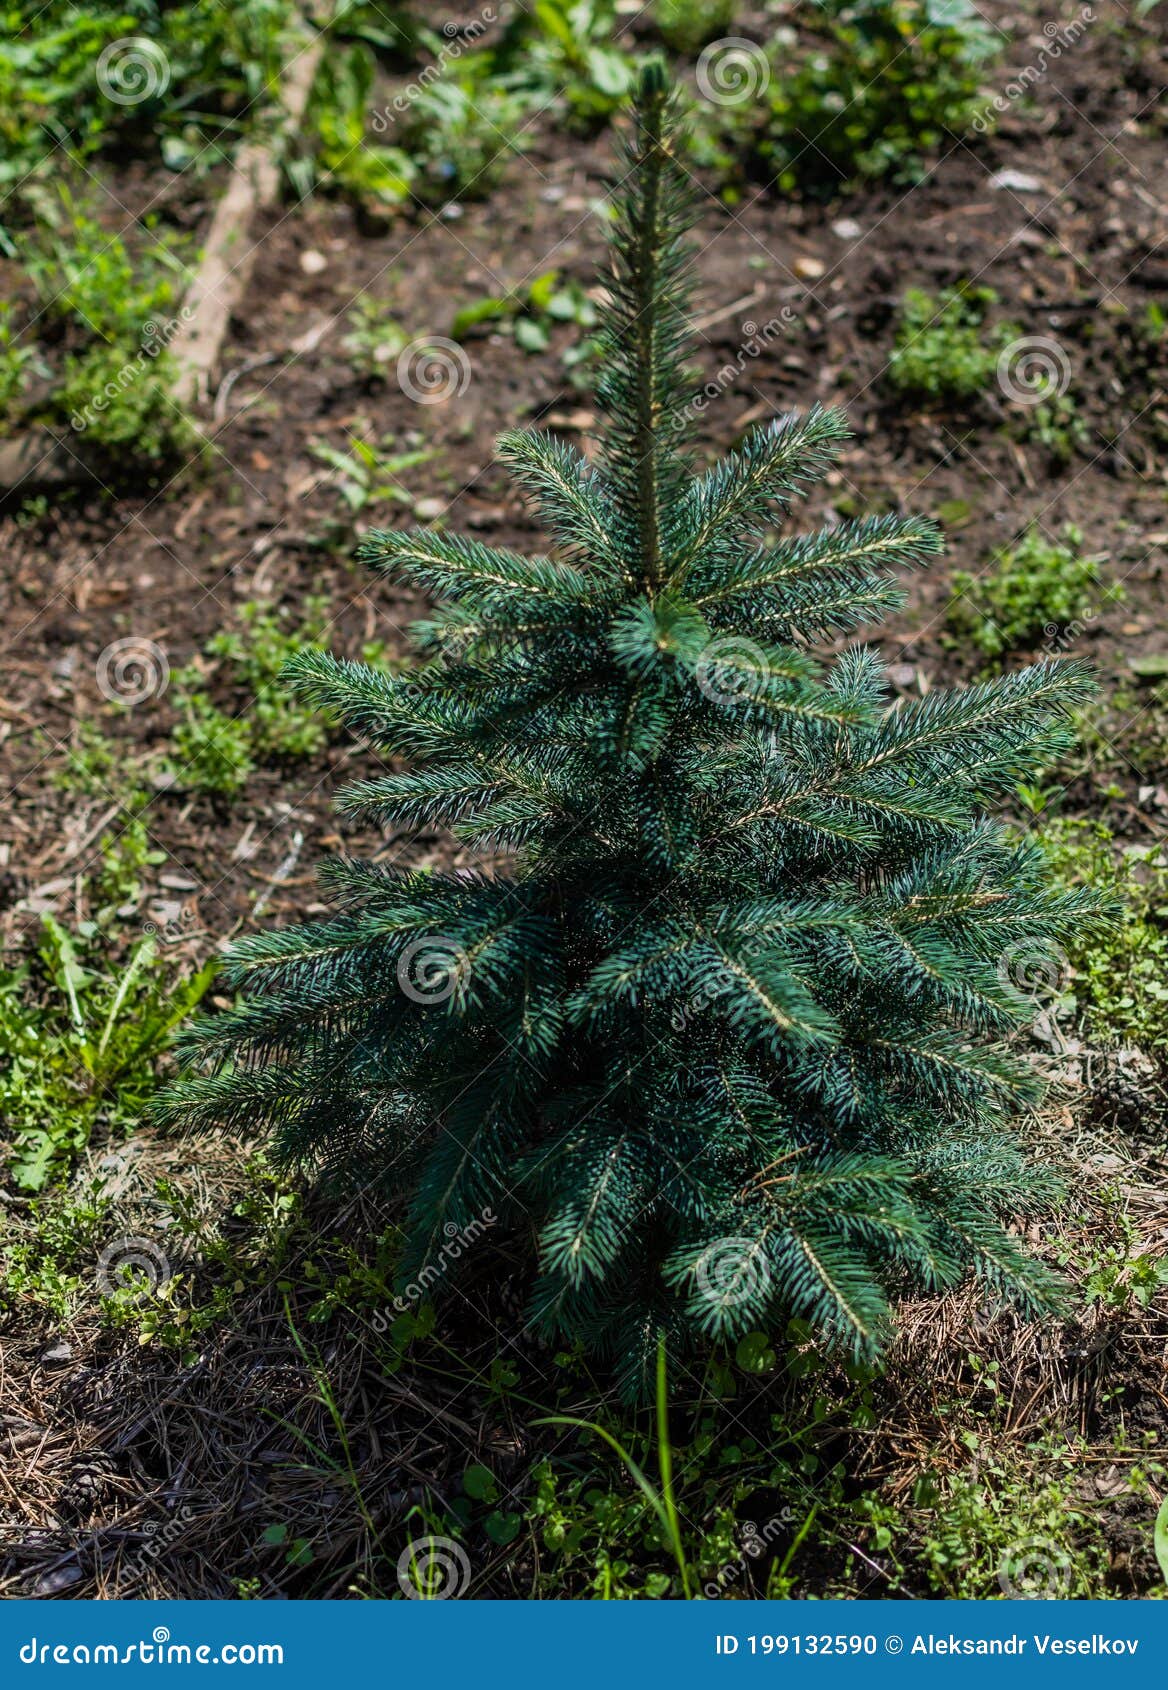 Small Sapling Coniferous Green Blue Spruce Tree Grows On Ground With Grass Siberian Nature Plant Stock Photo Image Of Background Ground